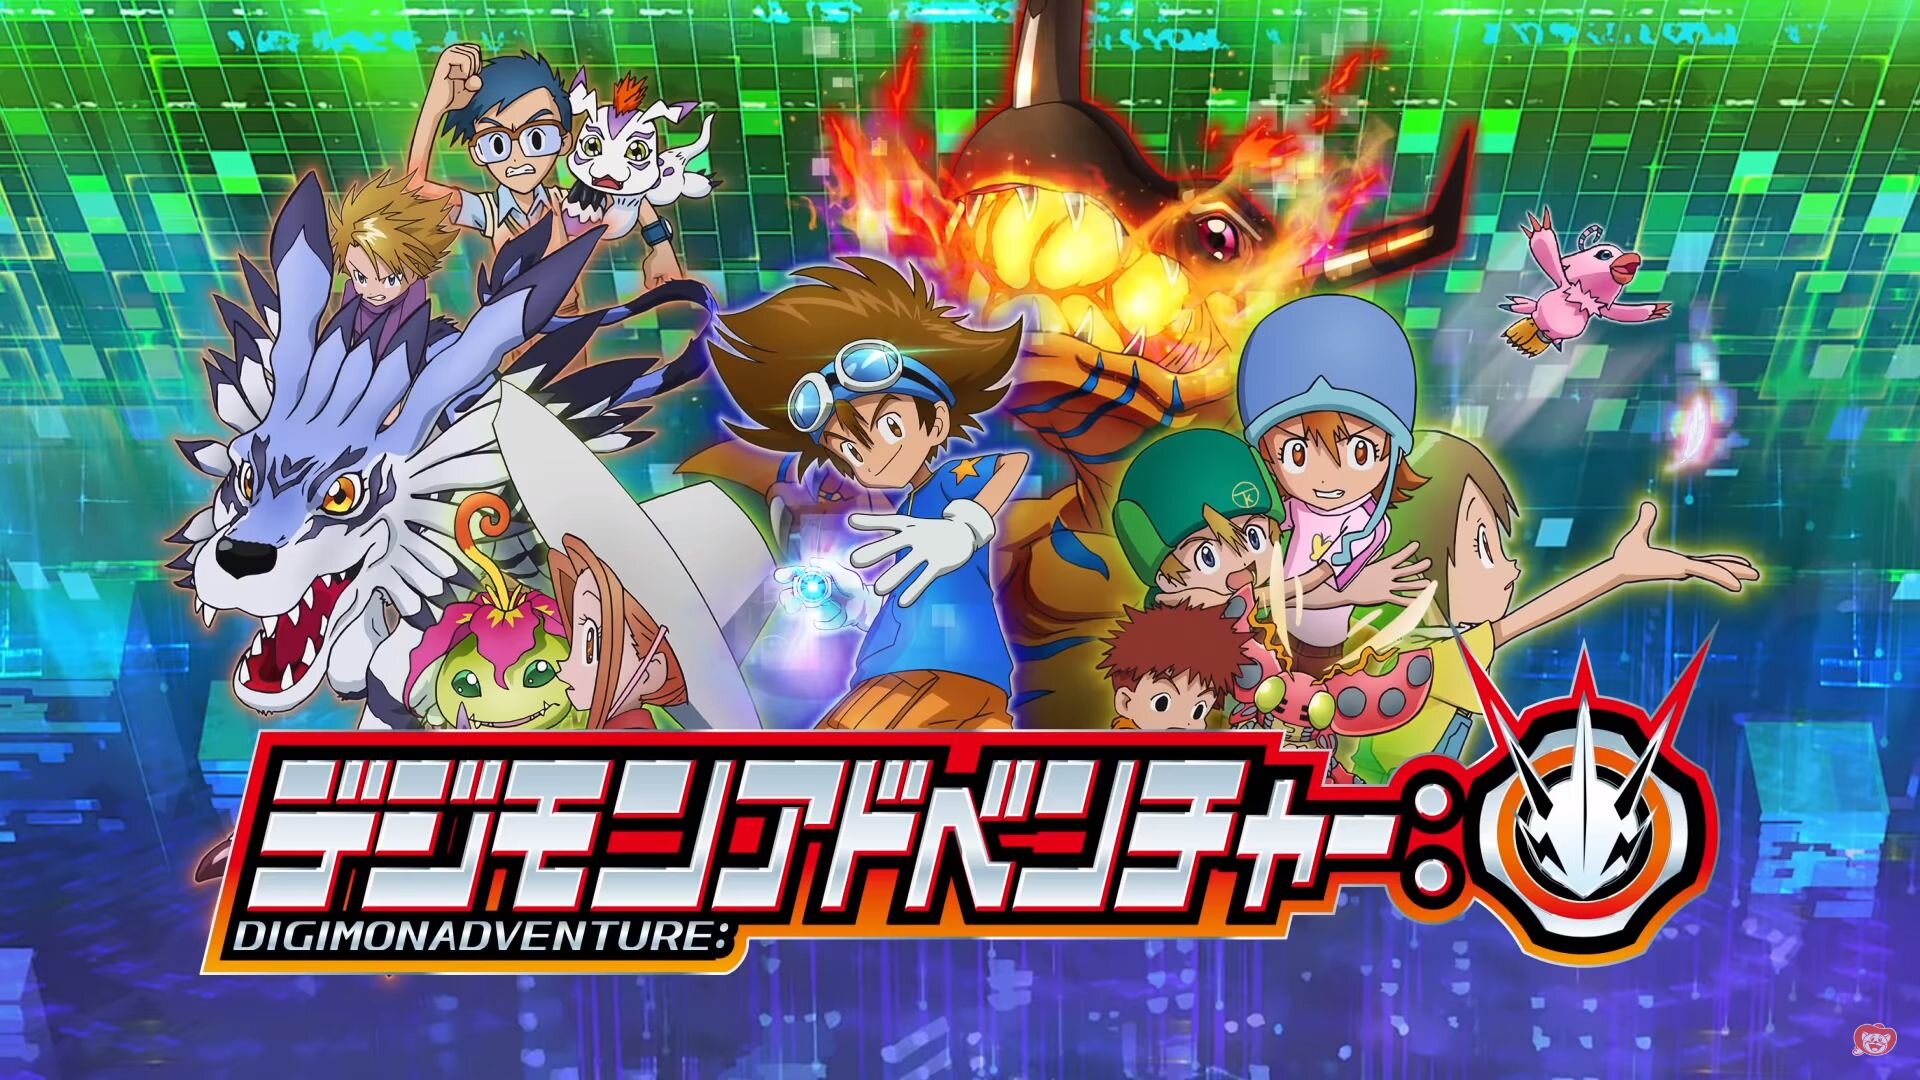 DIGIMON ADVENTURE: Appears to Use the Same Characters as DIGIMON ADVENTURE  with Some Potential Twists — GeekTyrant